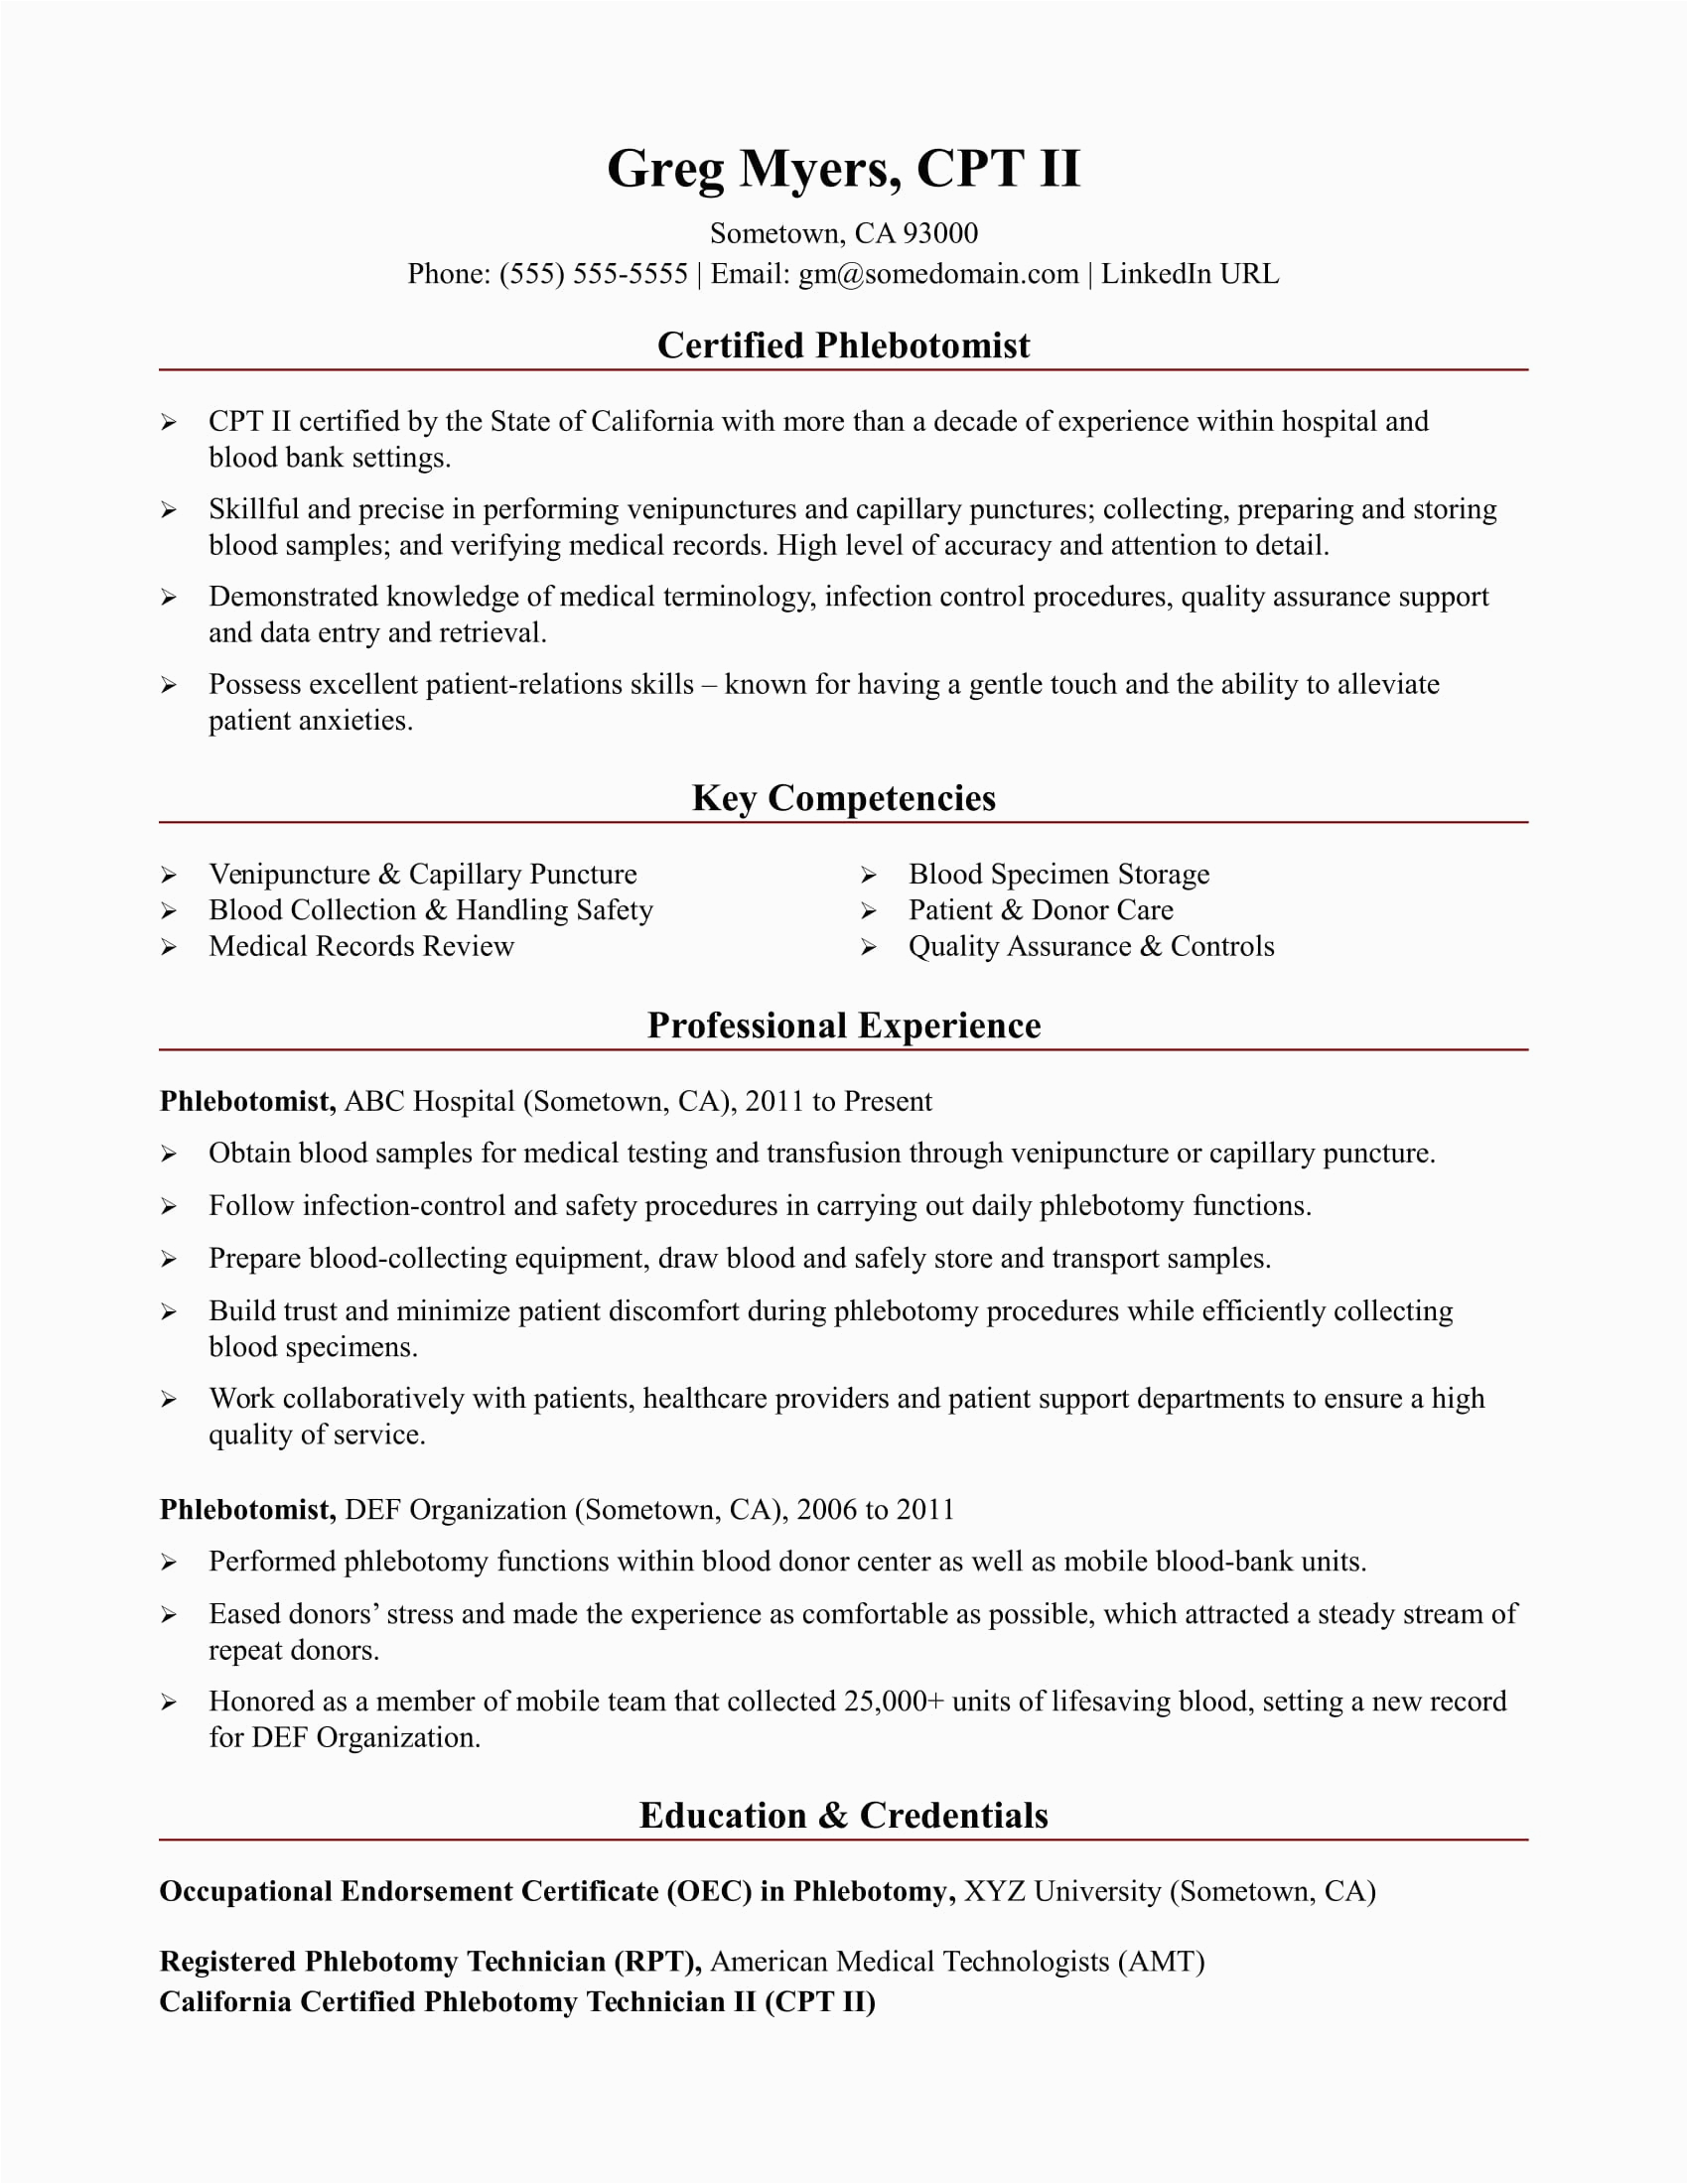 Sample Resume for A Entry Level New Graduate Certified Phlebotomist Phlebotomist Resume Sample